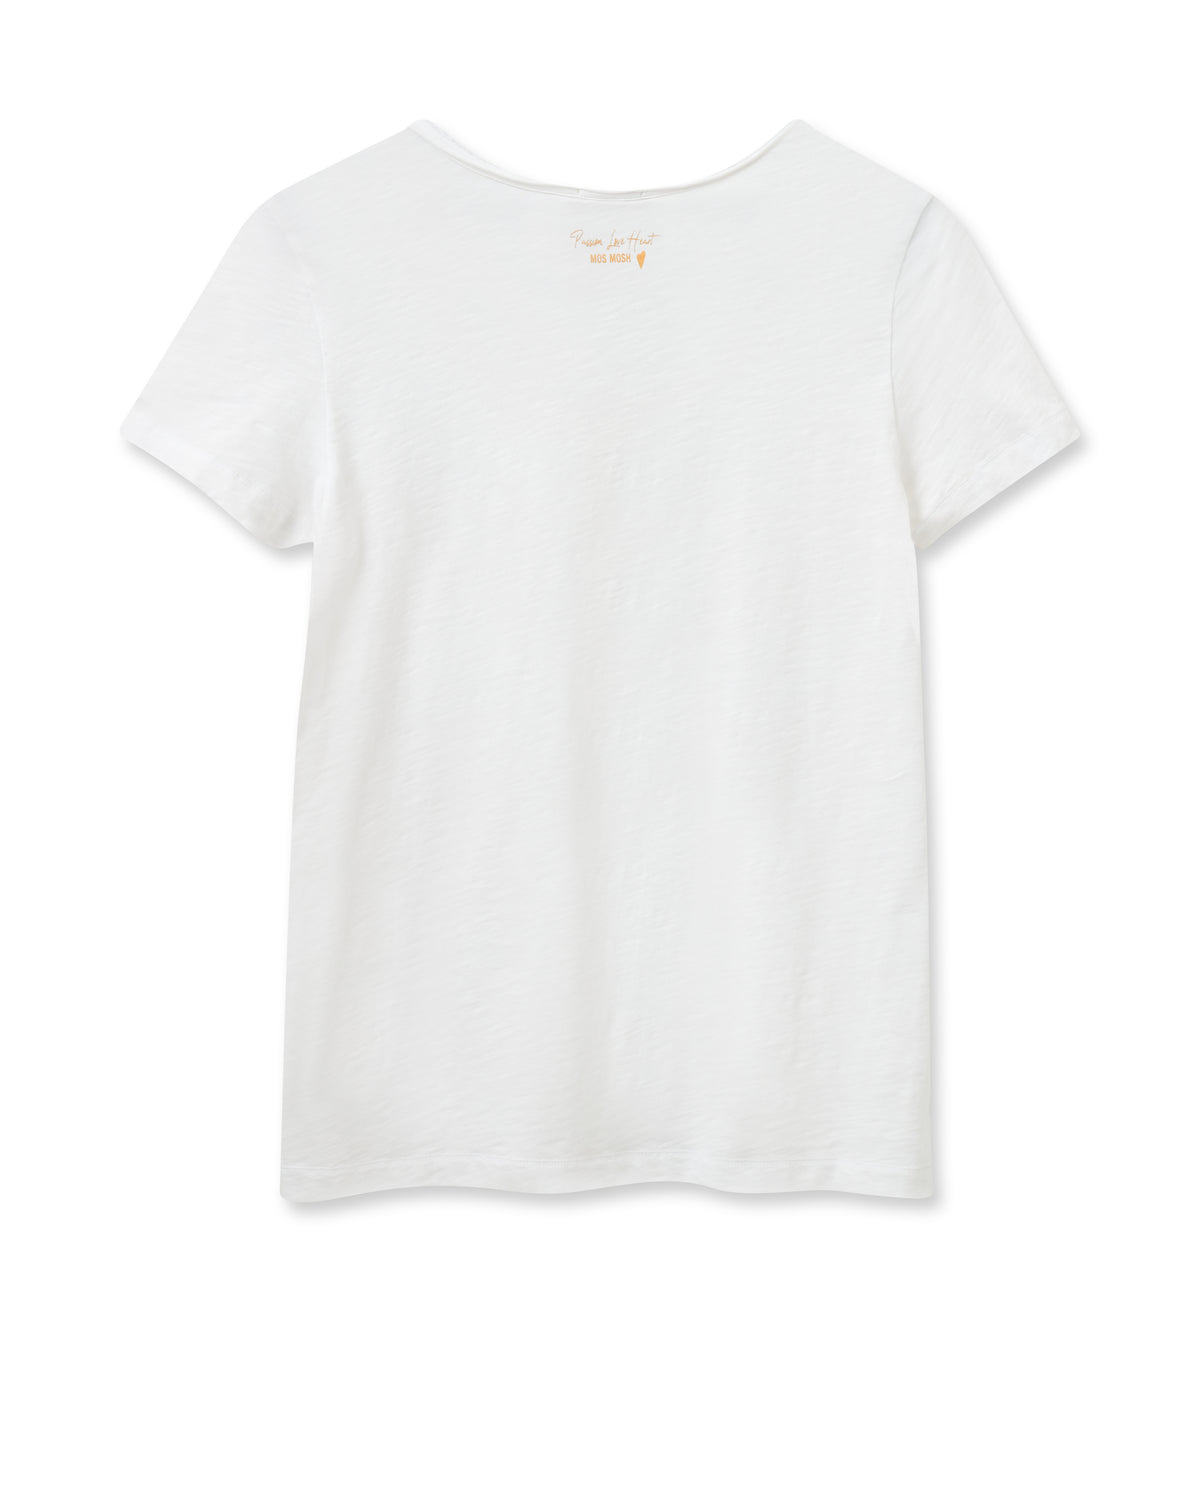 White V neck short sleeved tee with three button fastenings at the base of the V neckline